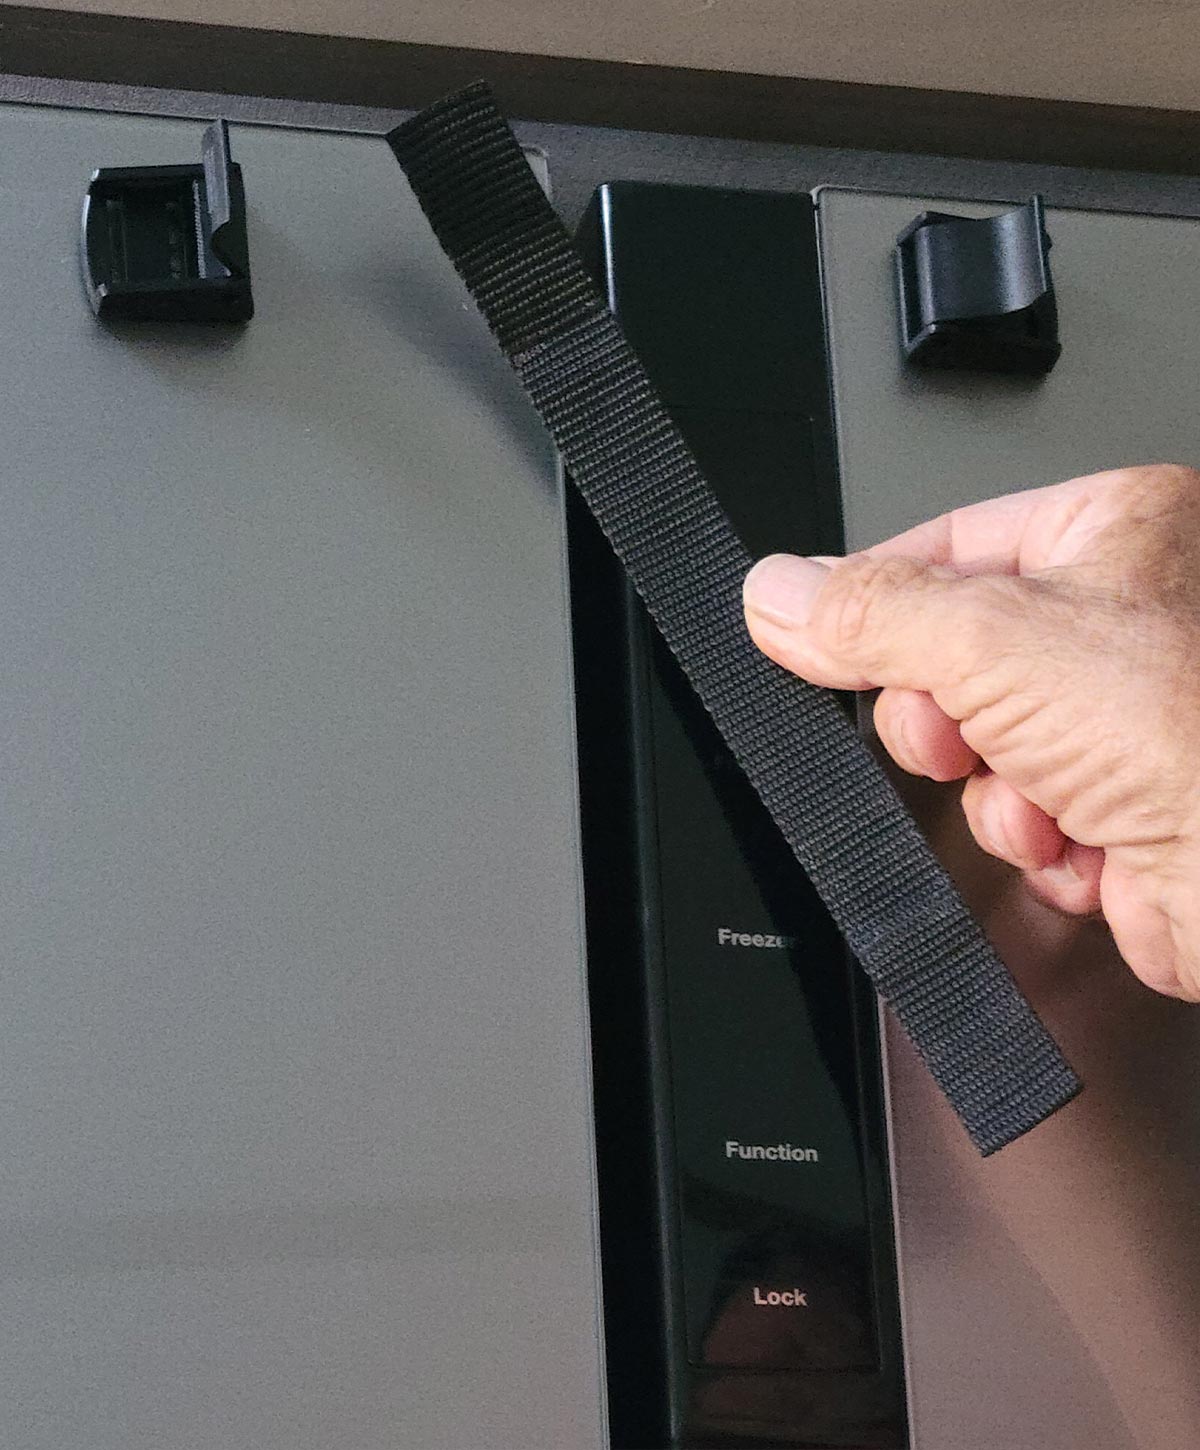 a hand holds the removed strap of the original factory installed refrigerator latch